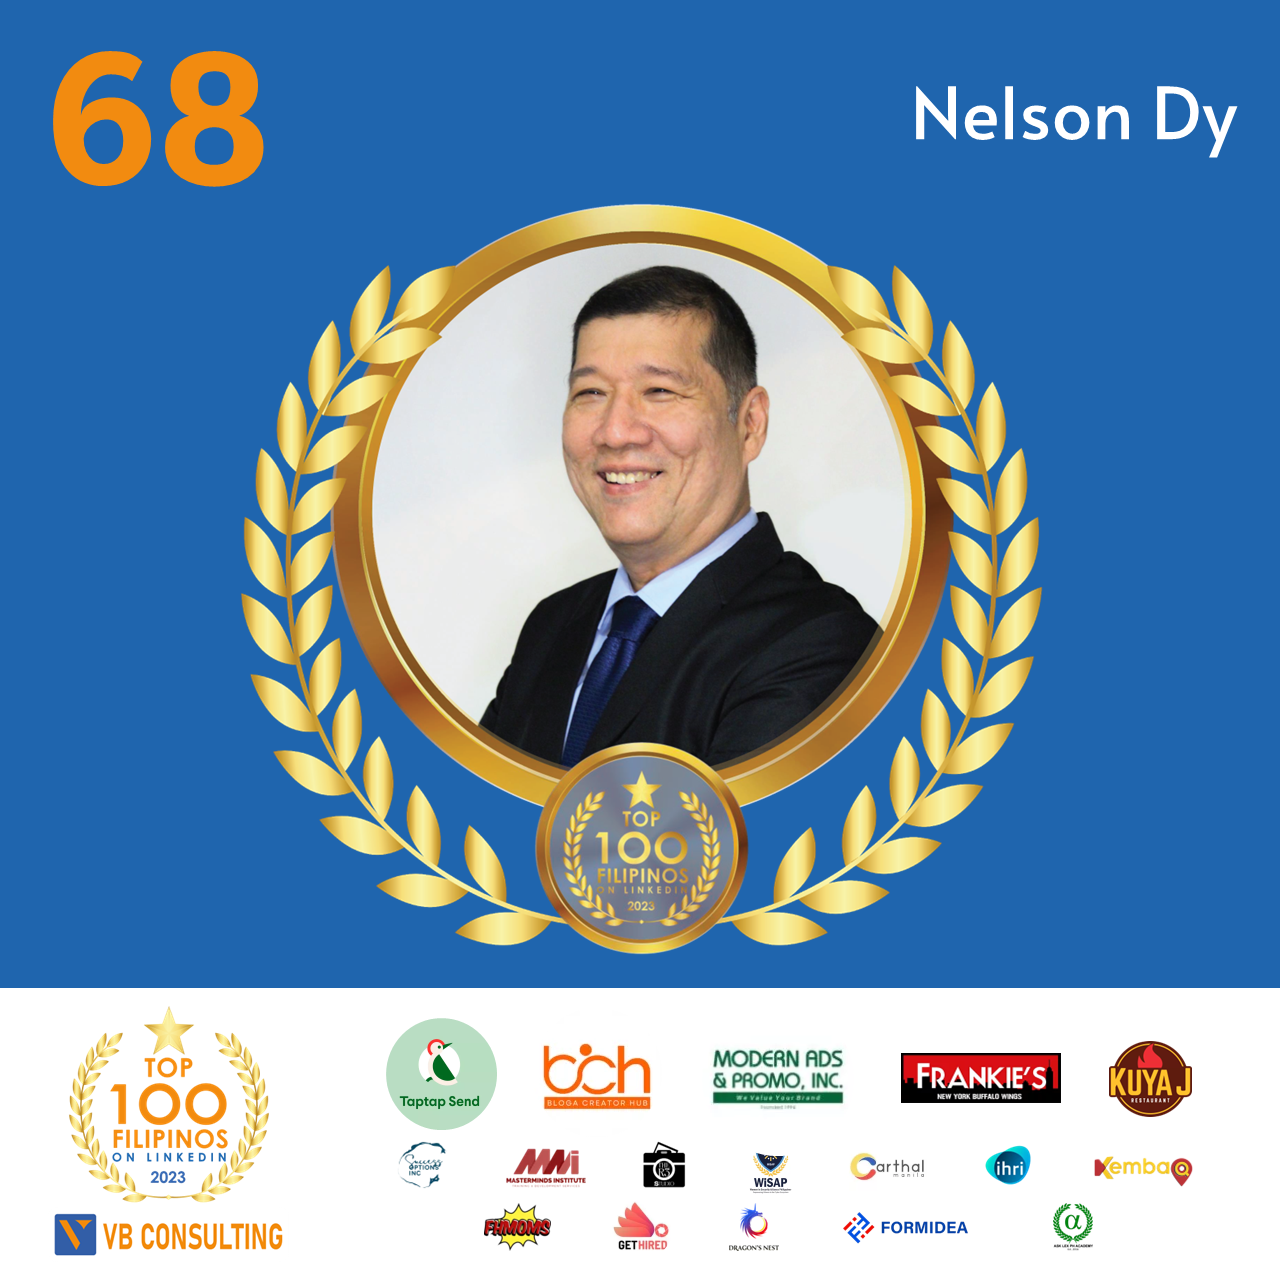 Nelson Dy